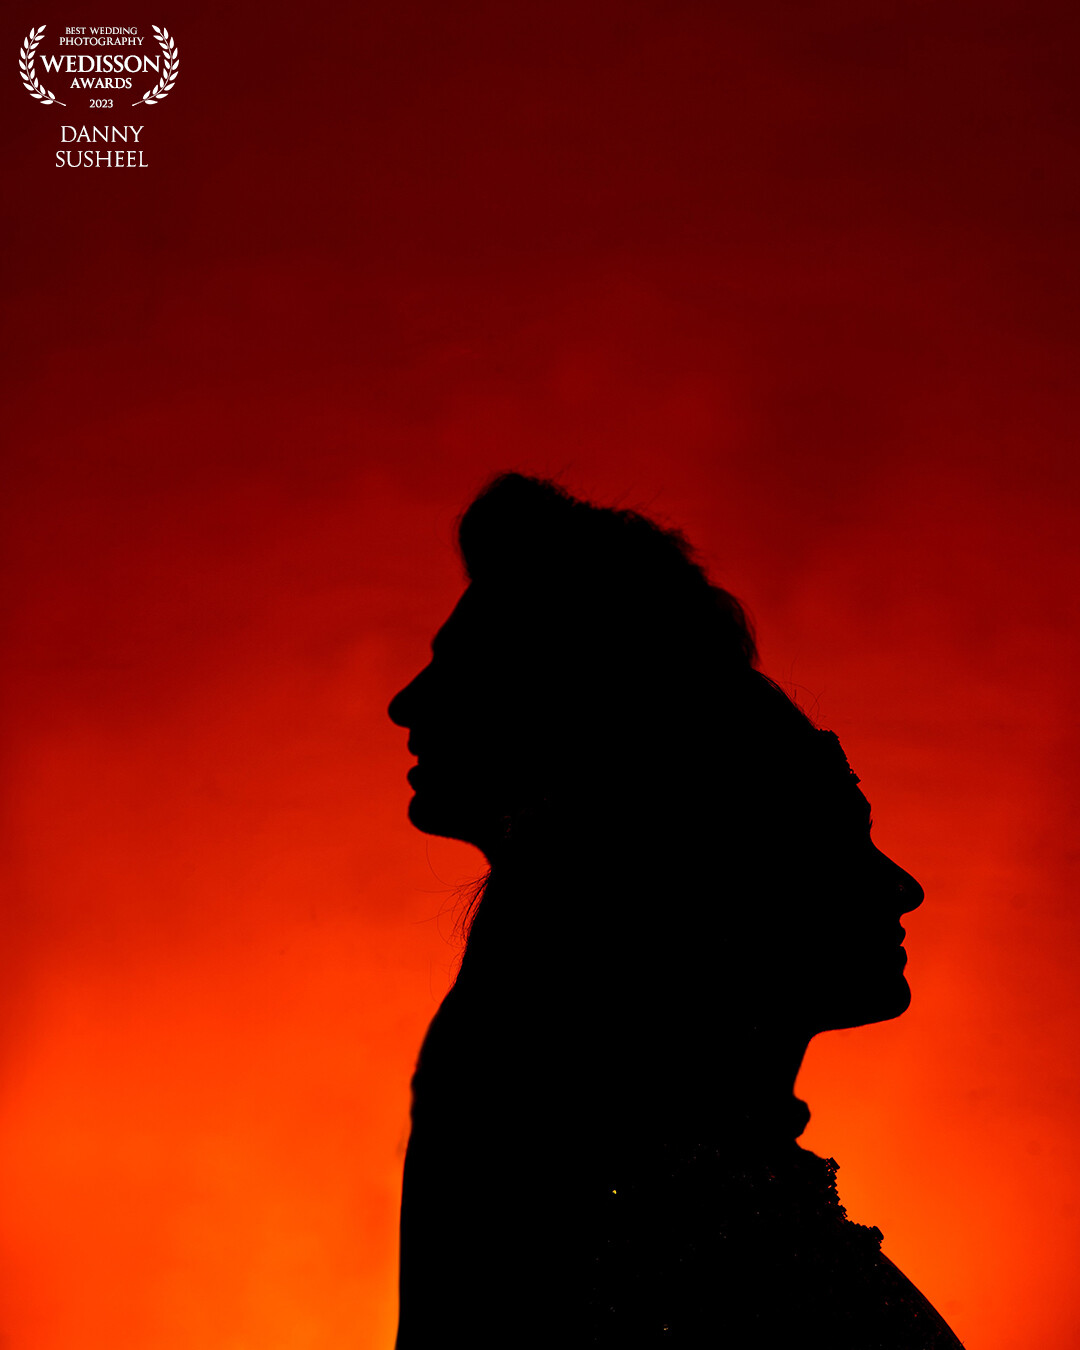 Silhouettes against a striking red backdrop, their glances speak volumes as they gaze into separate horizons.